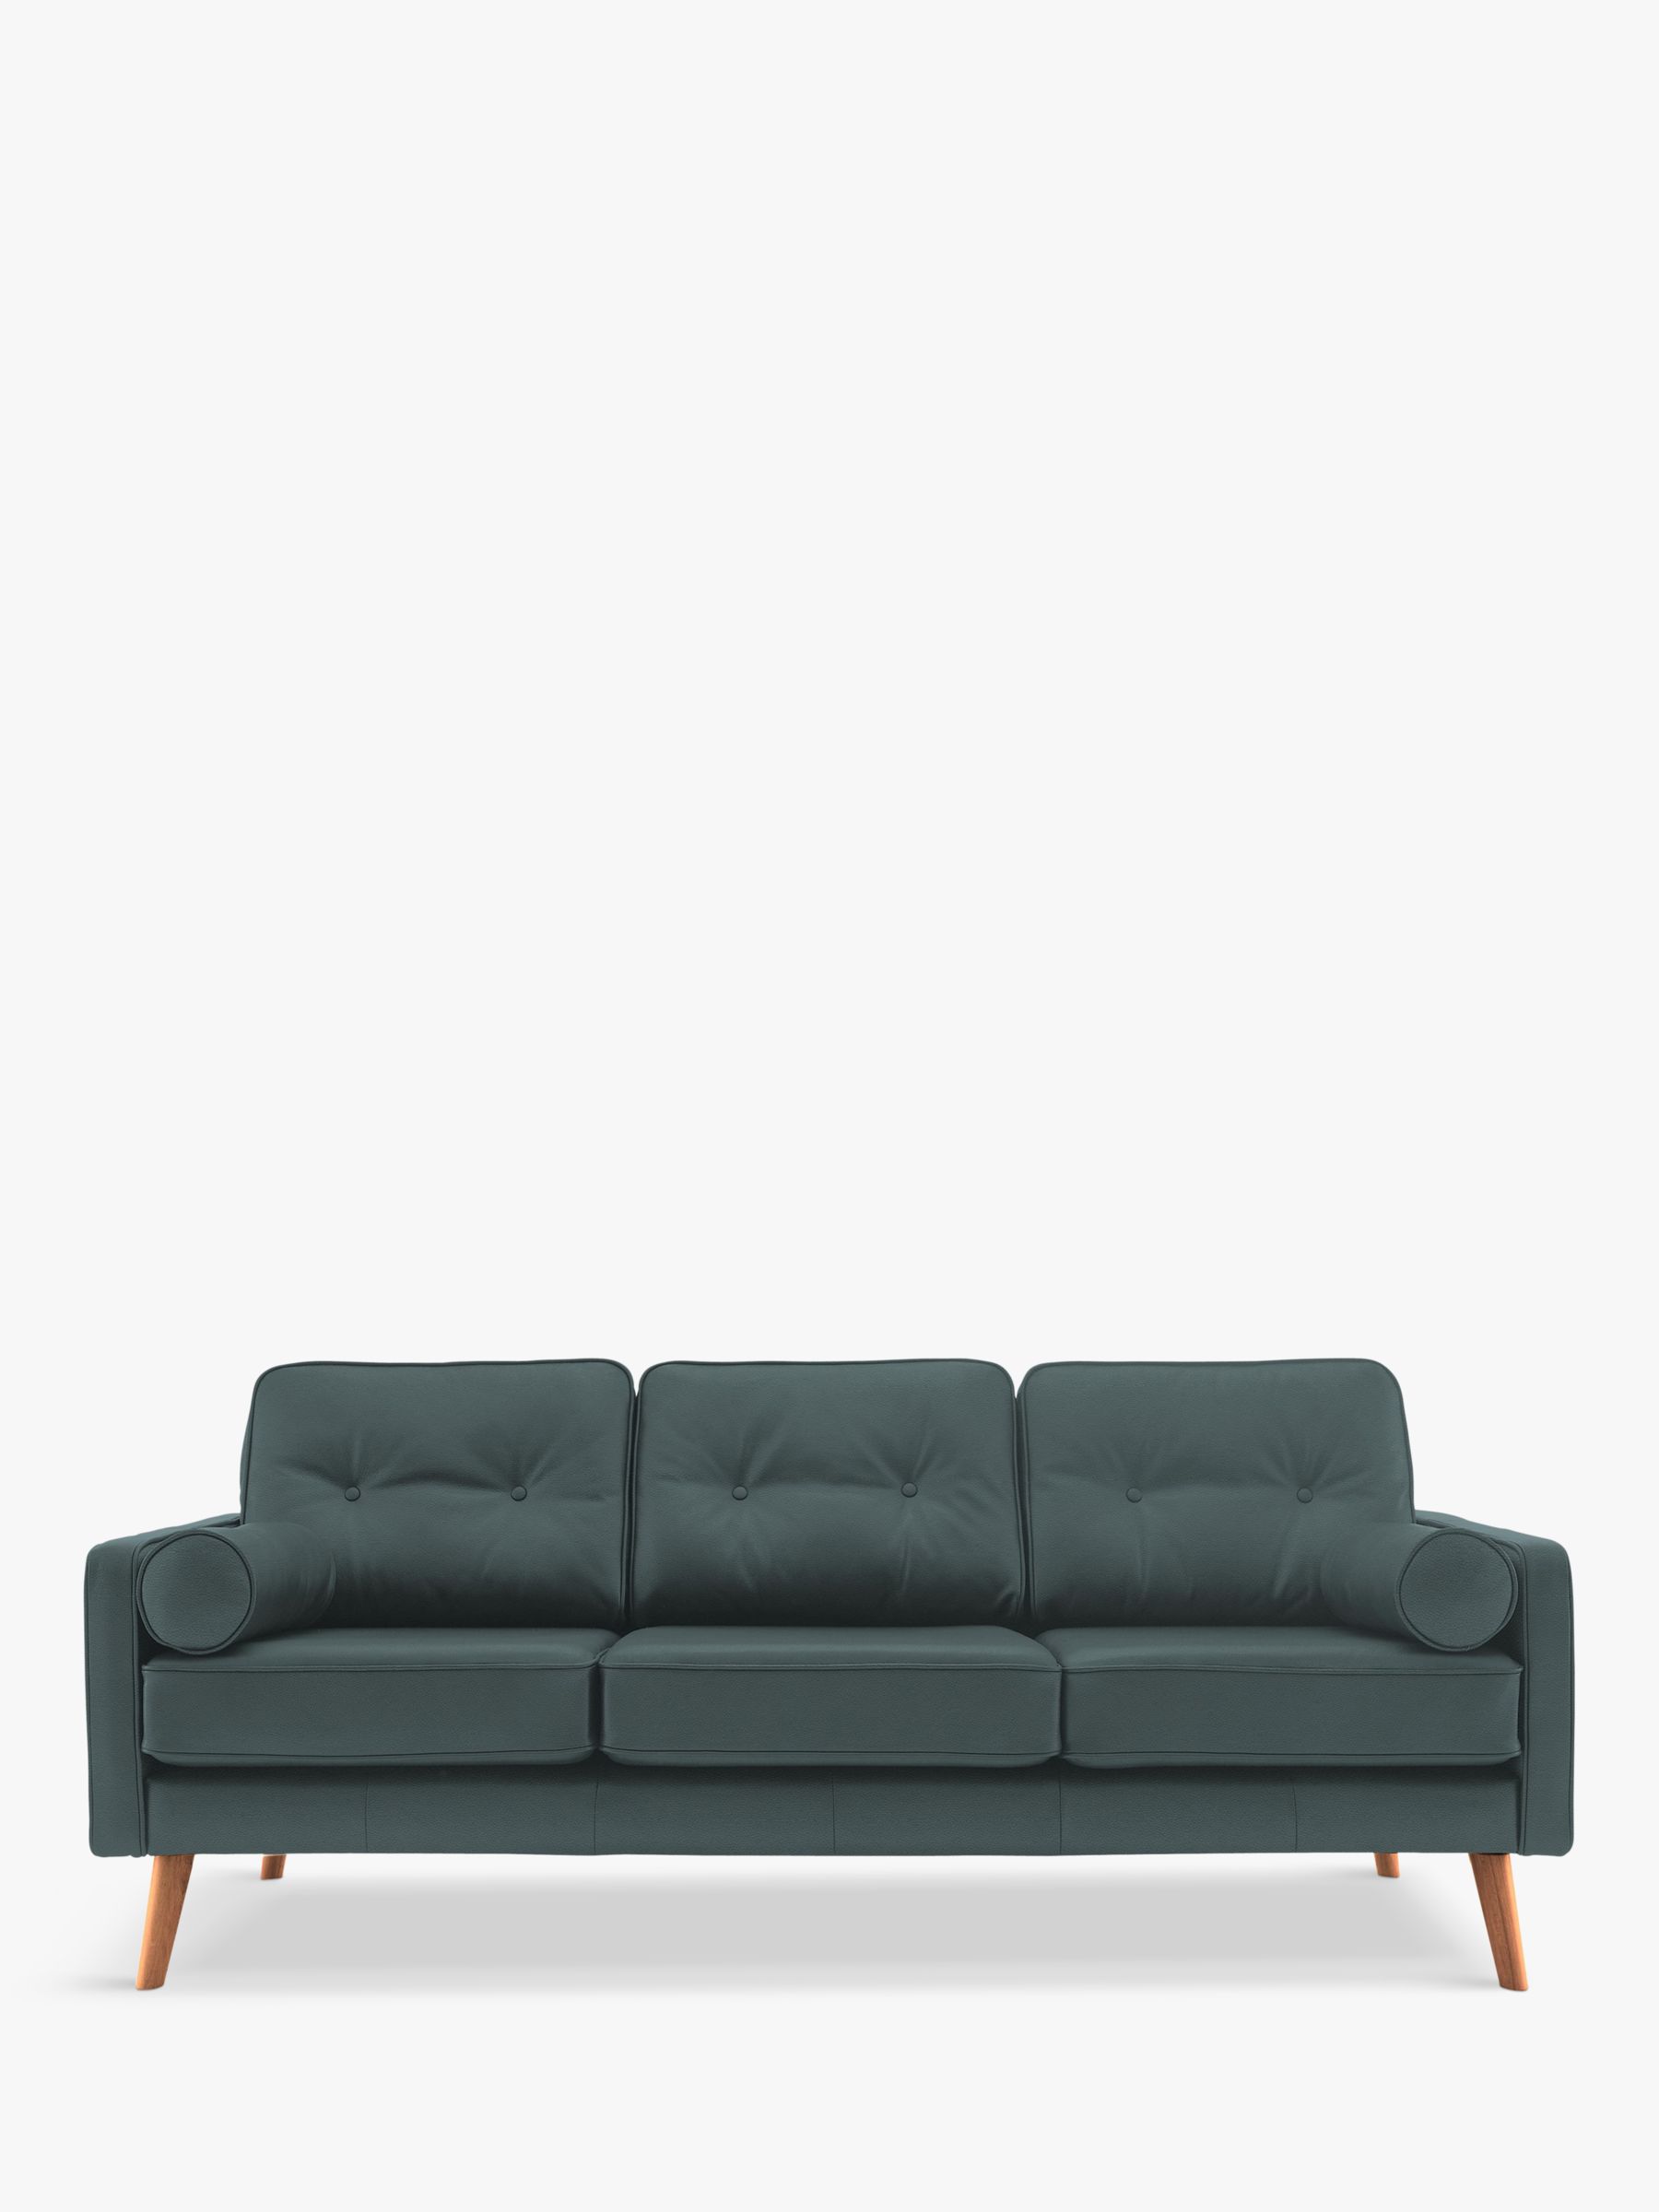 The Sixty Five Range, G Plan Vintage The Sixty Five Large 3 Seater Leather Sofa, Cambridge Petrol Blue